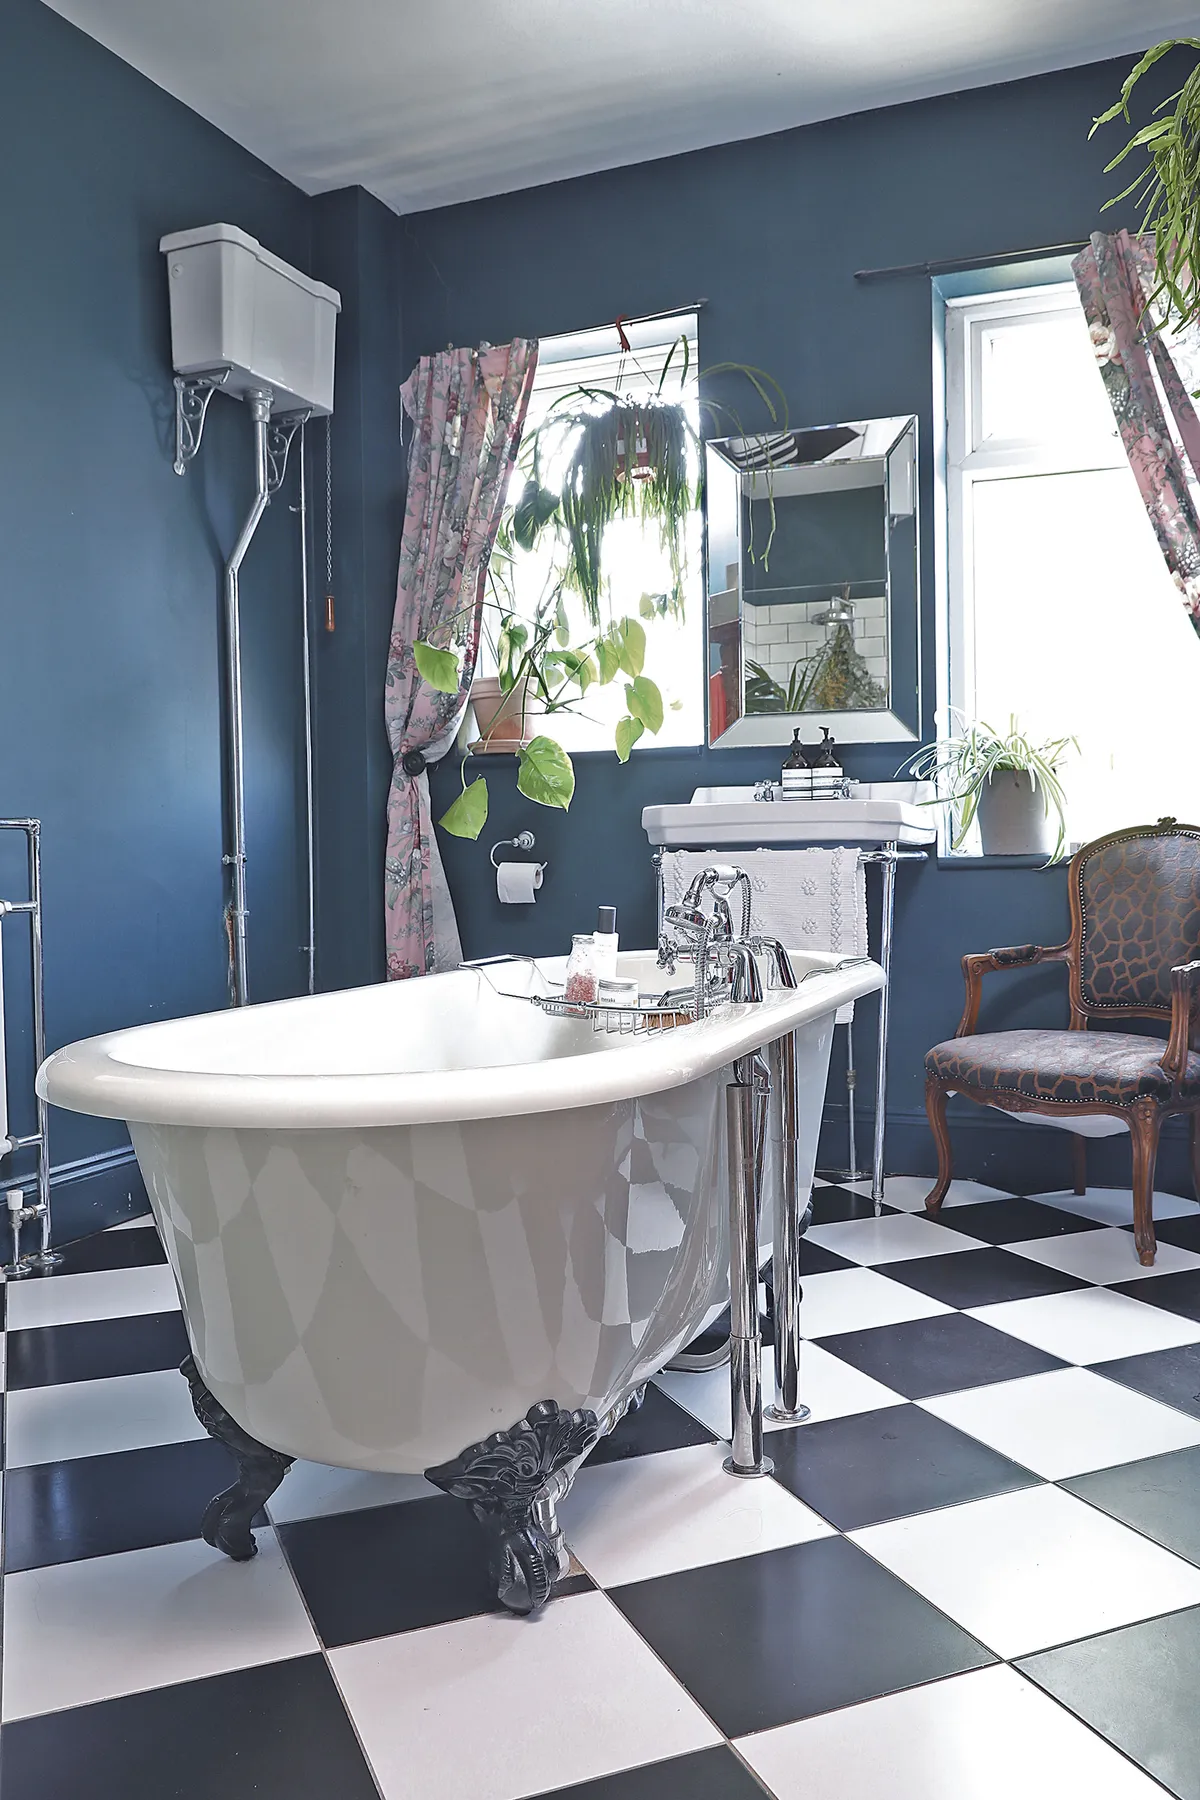 ‘I wanted the bathroom to look very Victorian with the high cistern toilet, monochrome flooring and vintage curtains. We chose Hague Blue by Farrow & Ball for the walls as the room’s so big and light, it can take it’